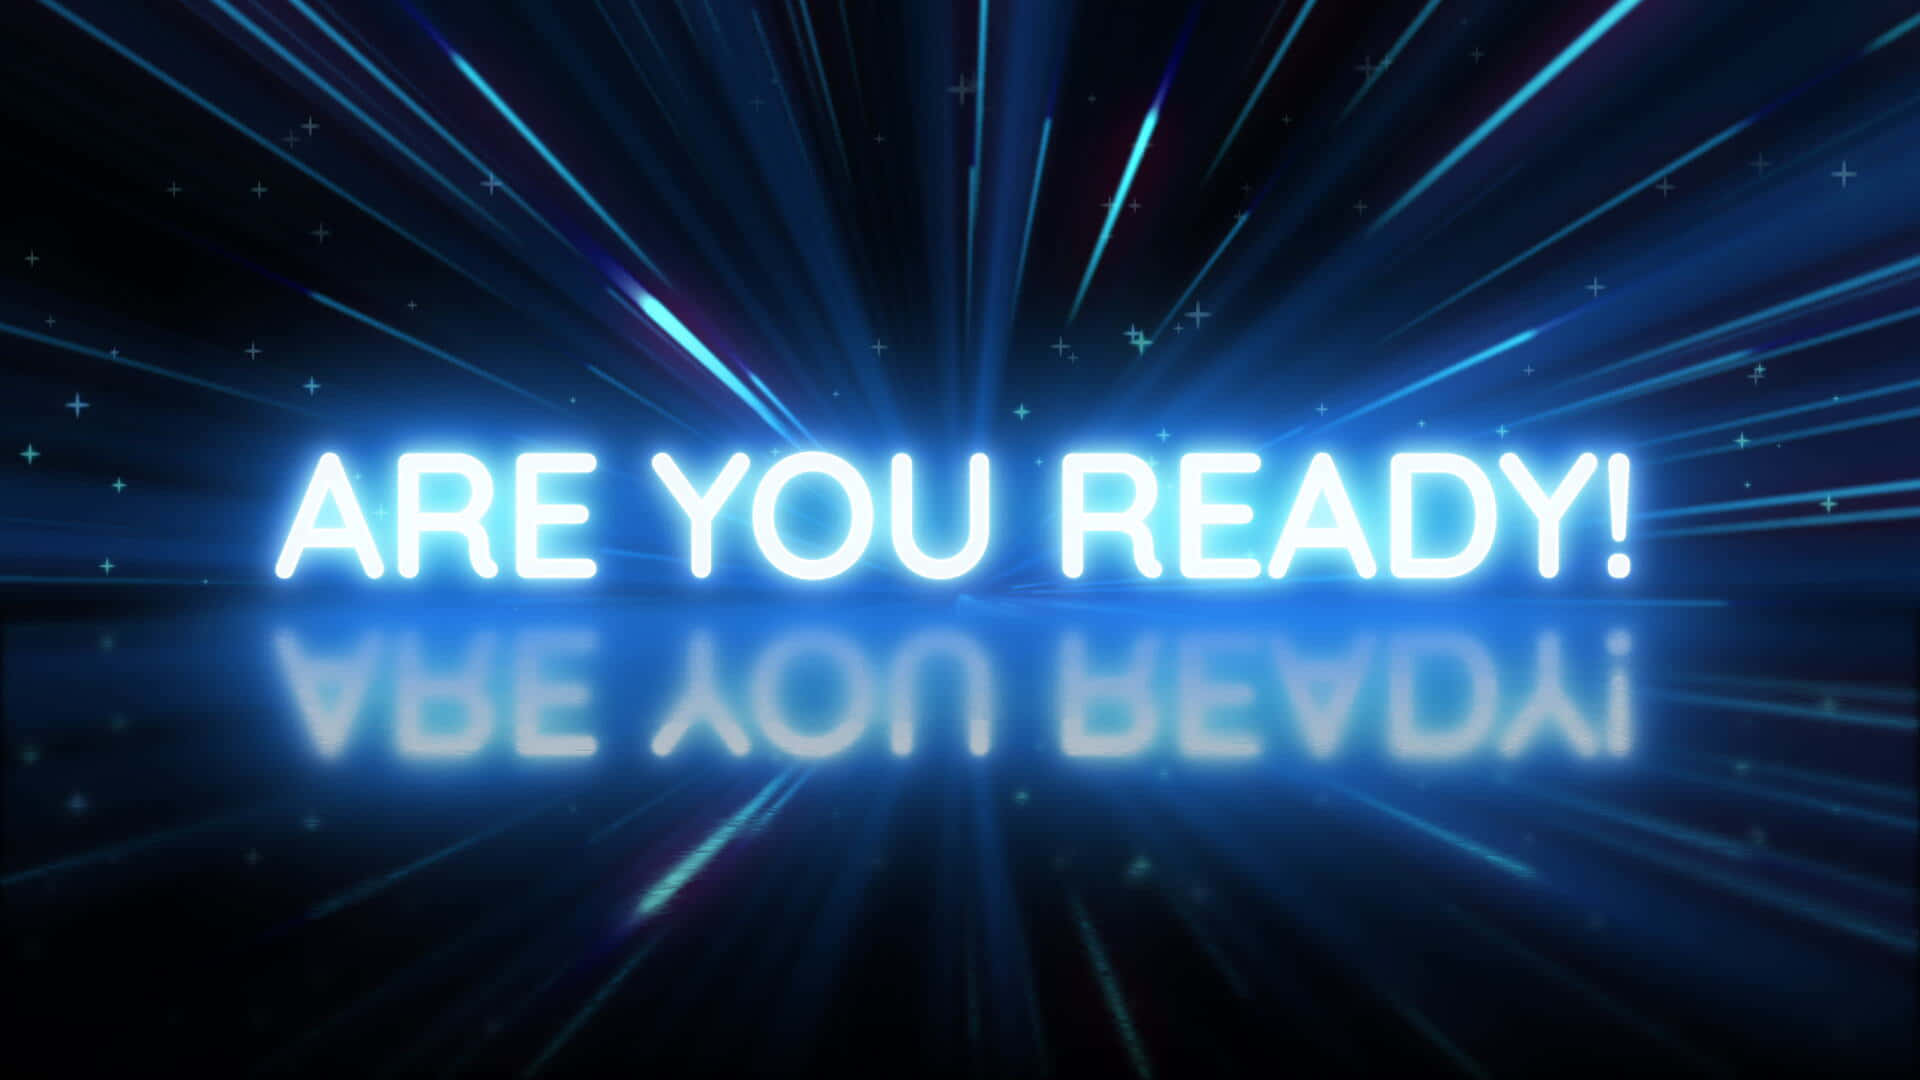 Are You Ready! Wallpaper